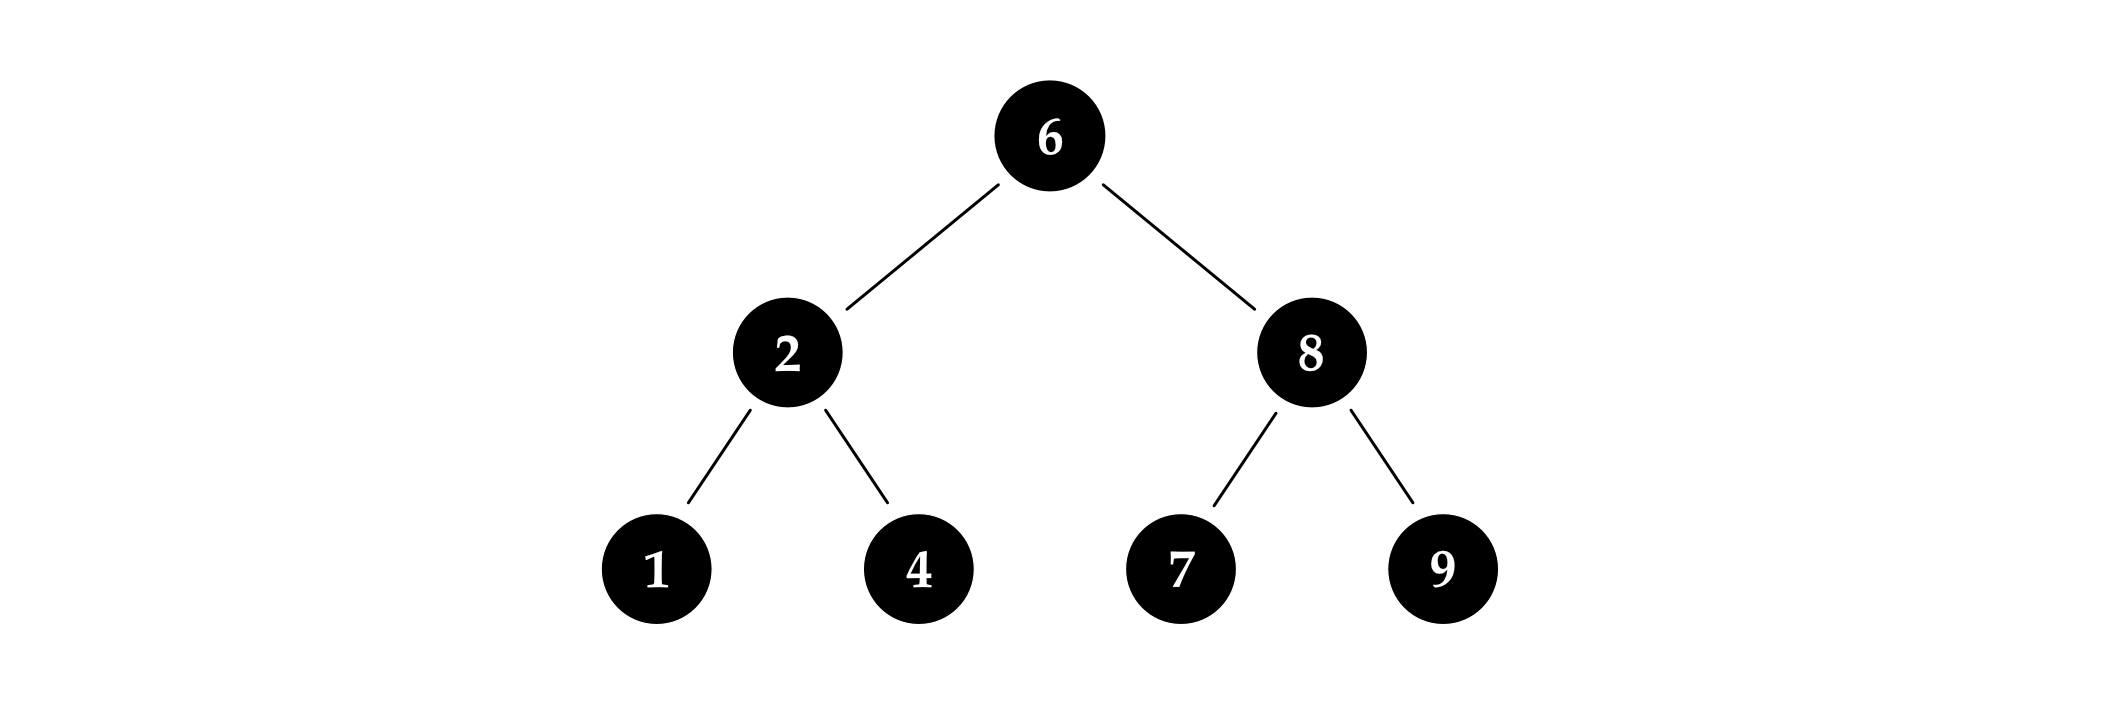 Figure 4.3: An example red-black tree where every node is black.